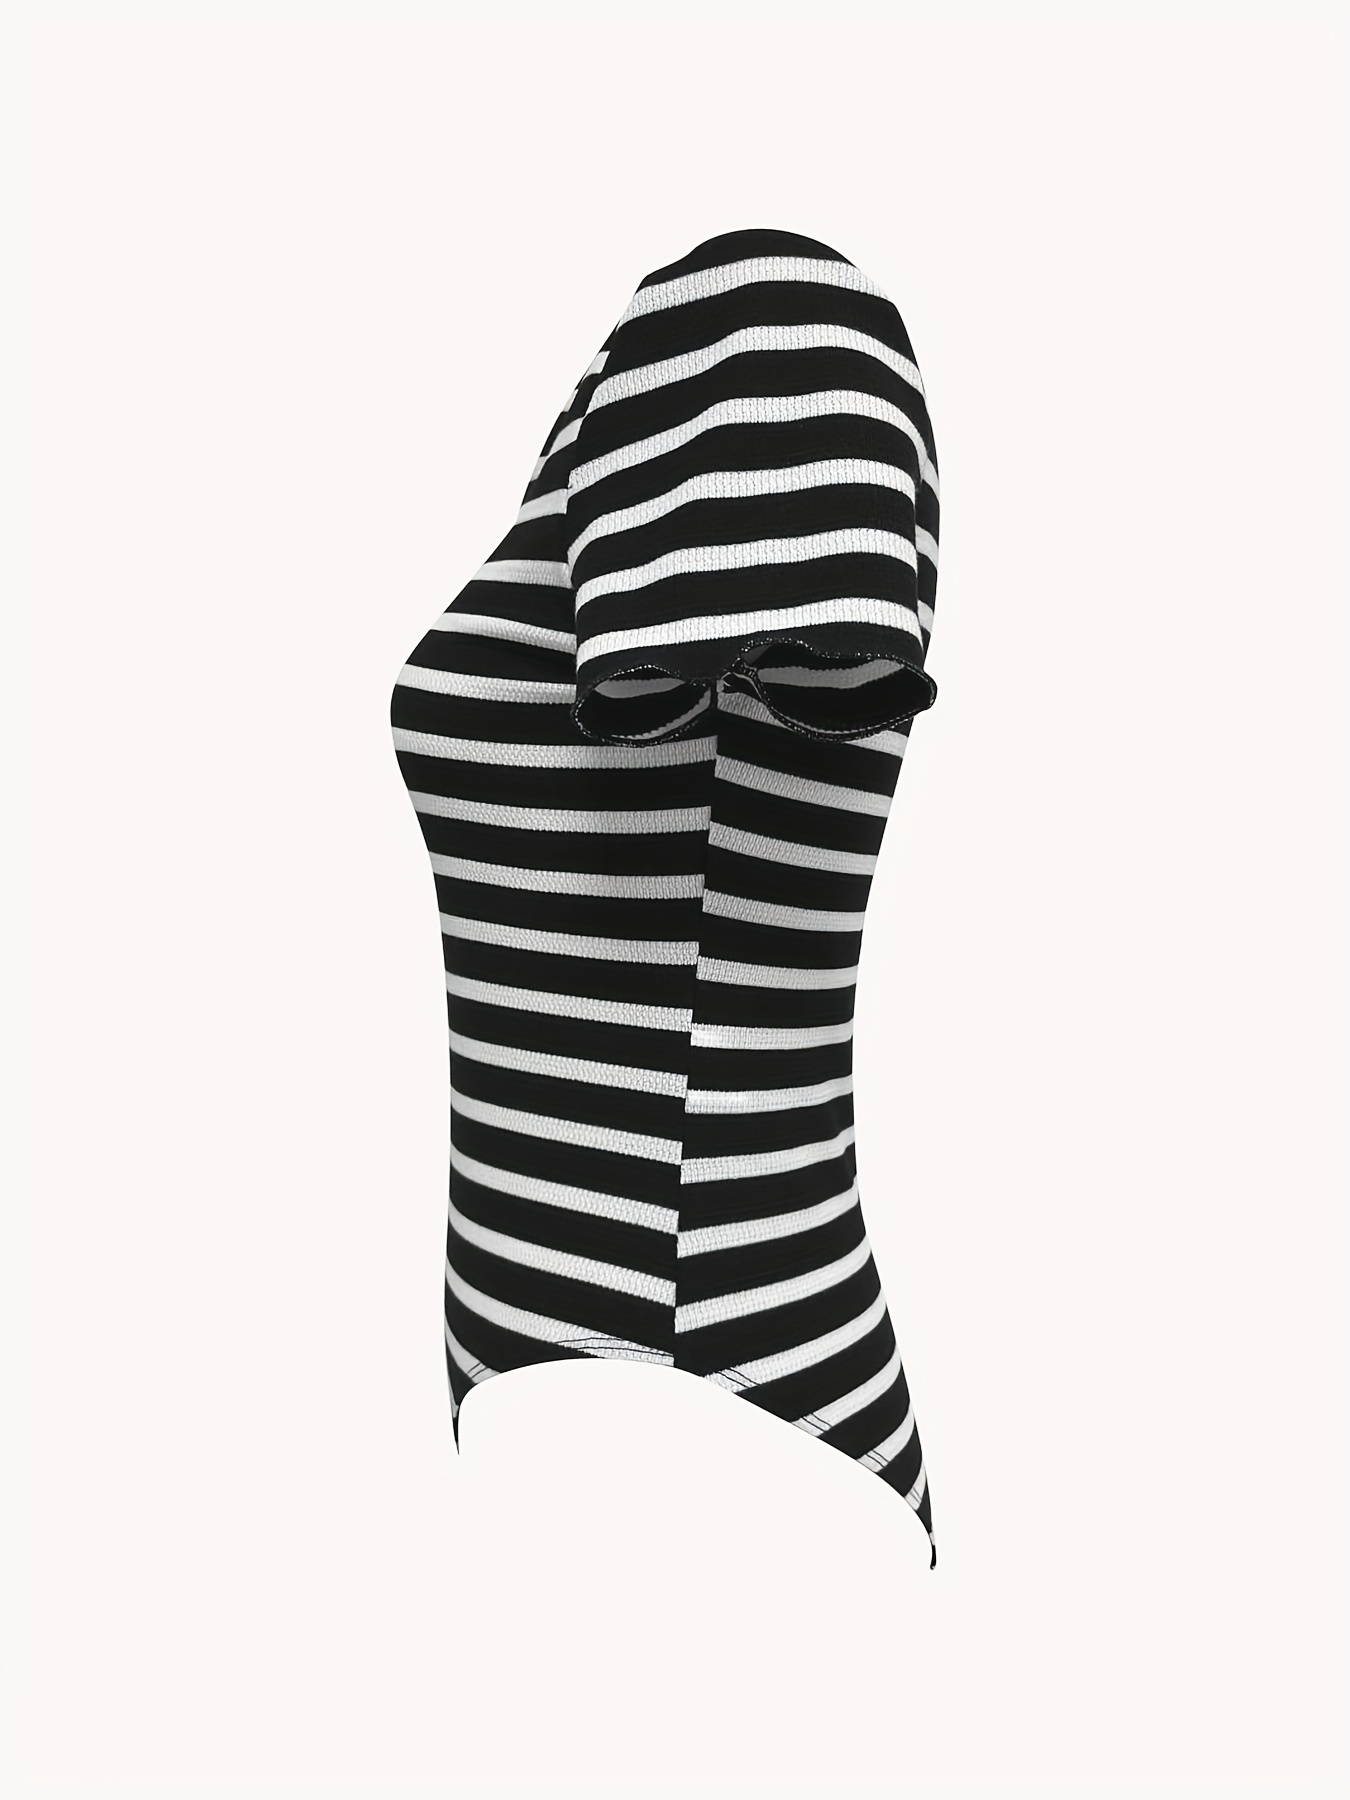 Red & White Striped Top - Striped Bodysuit - Notched Women's Top